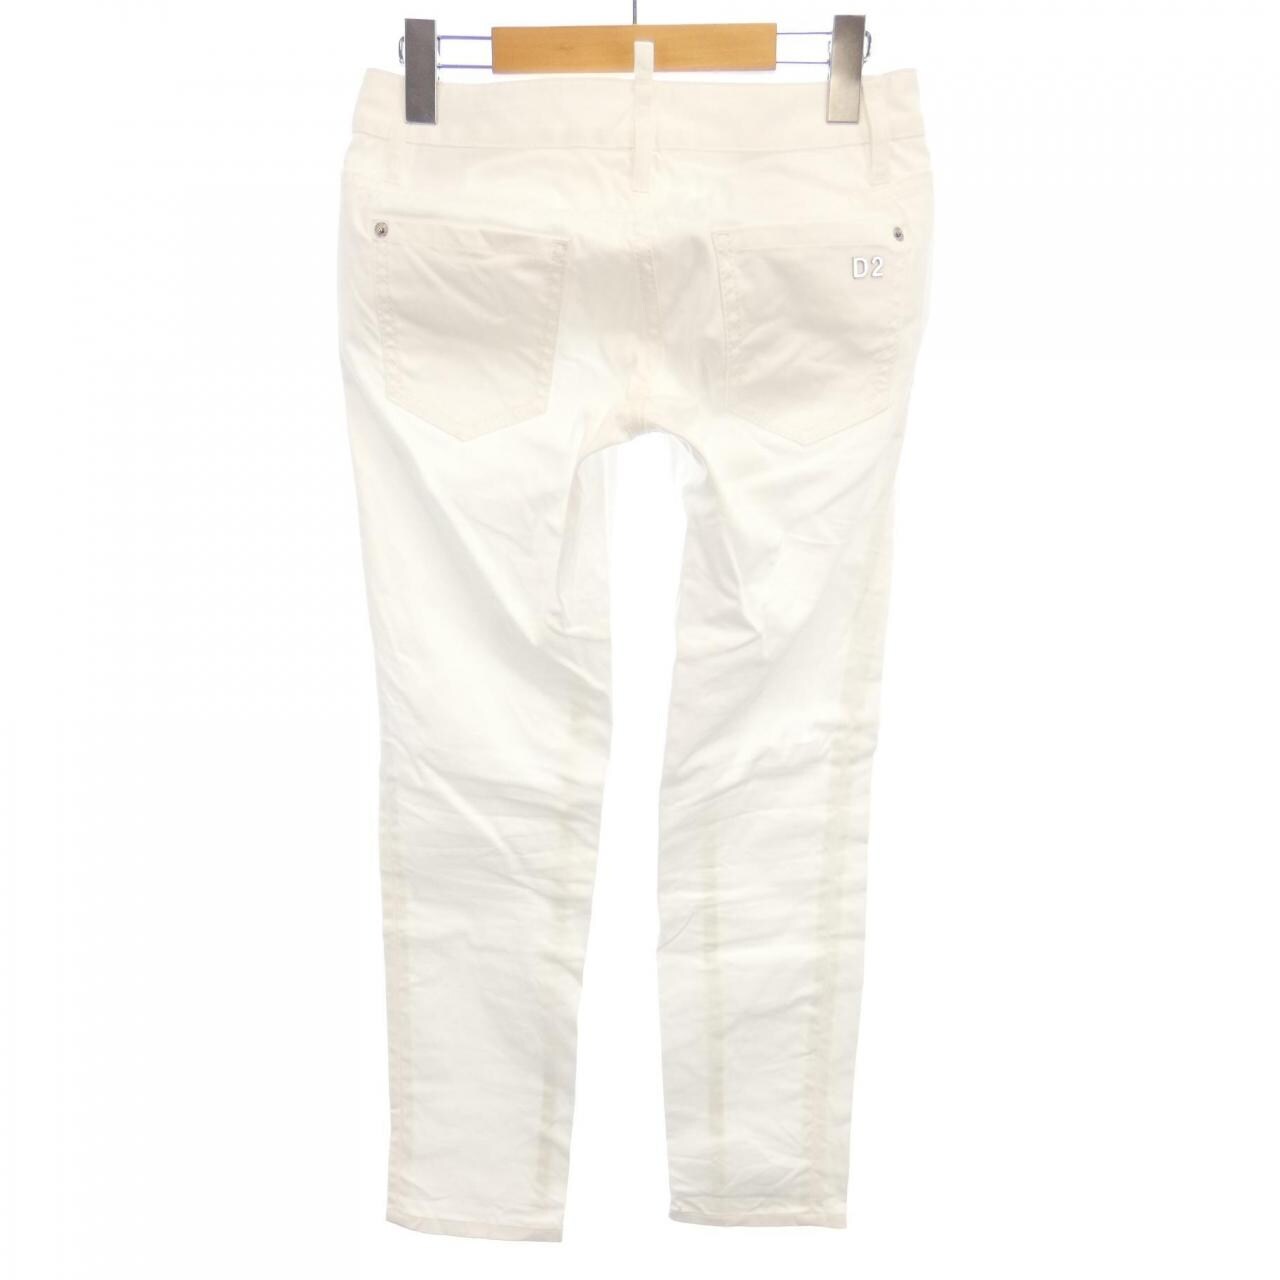 DSQUARED2 DSQUARED2 Jeans